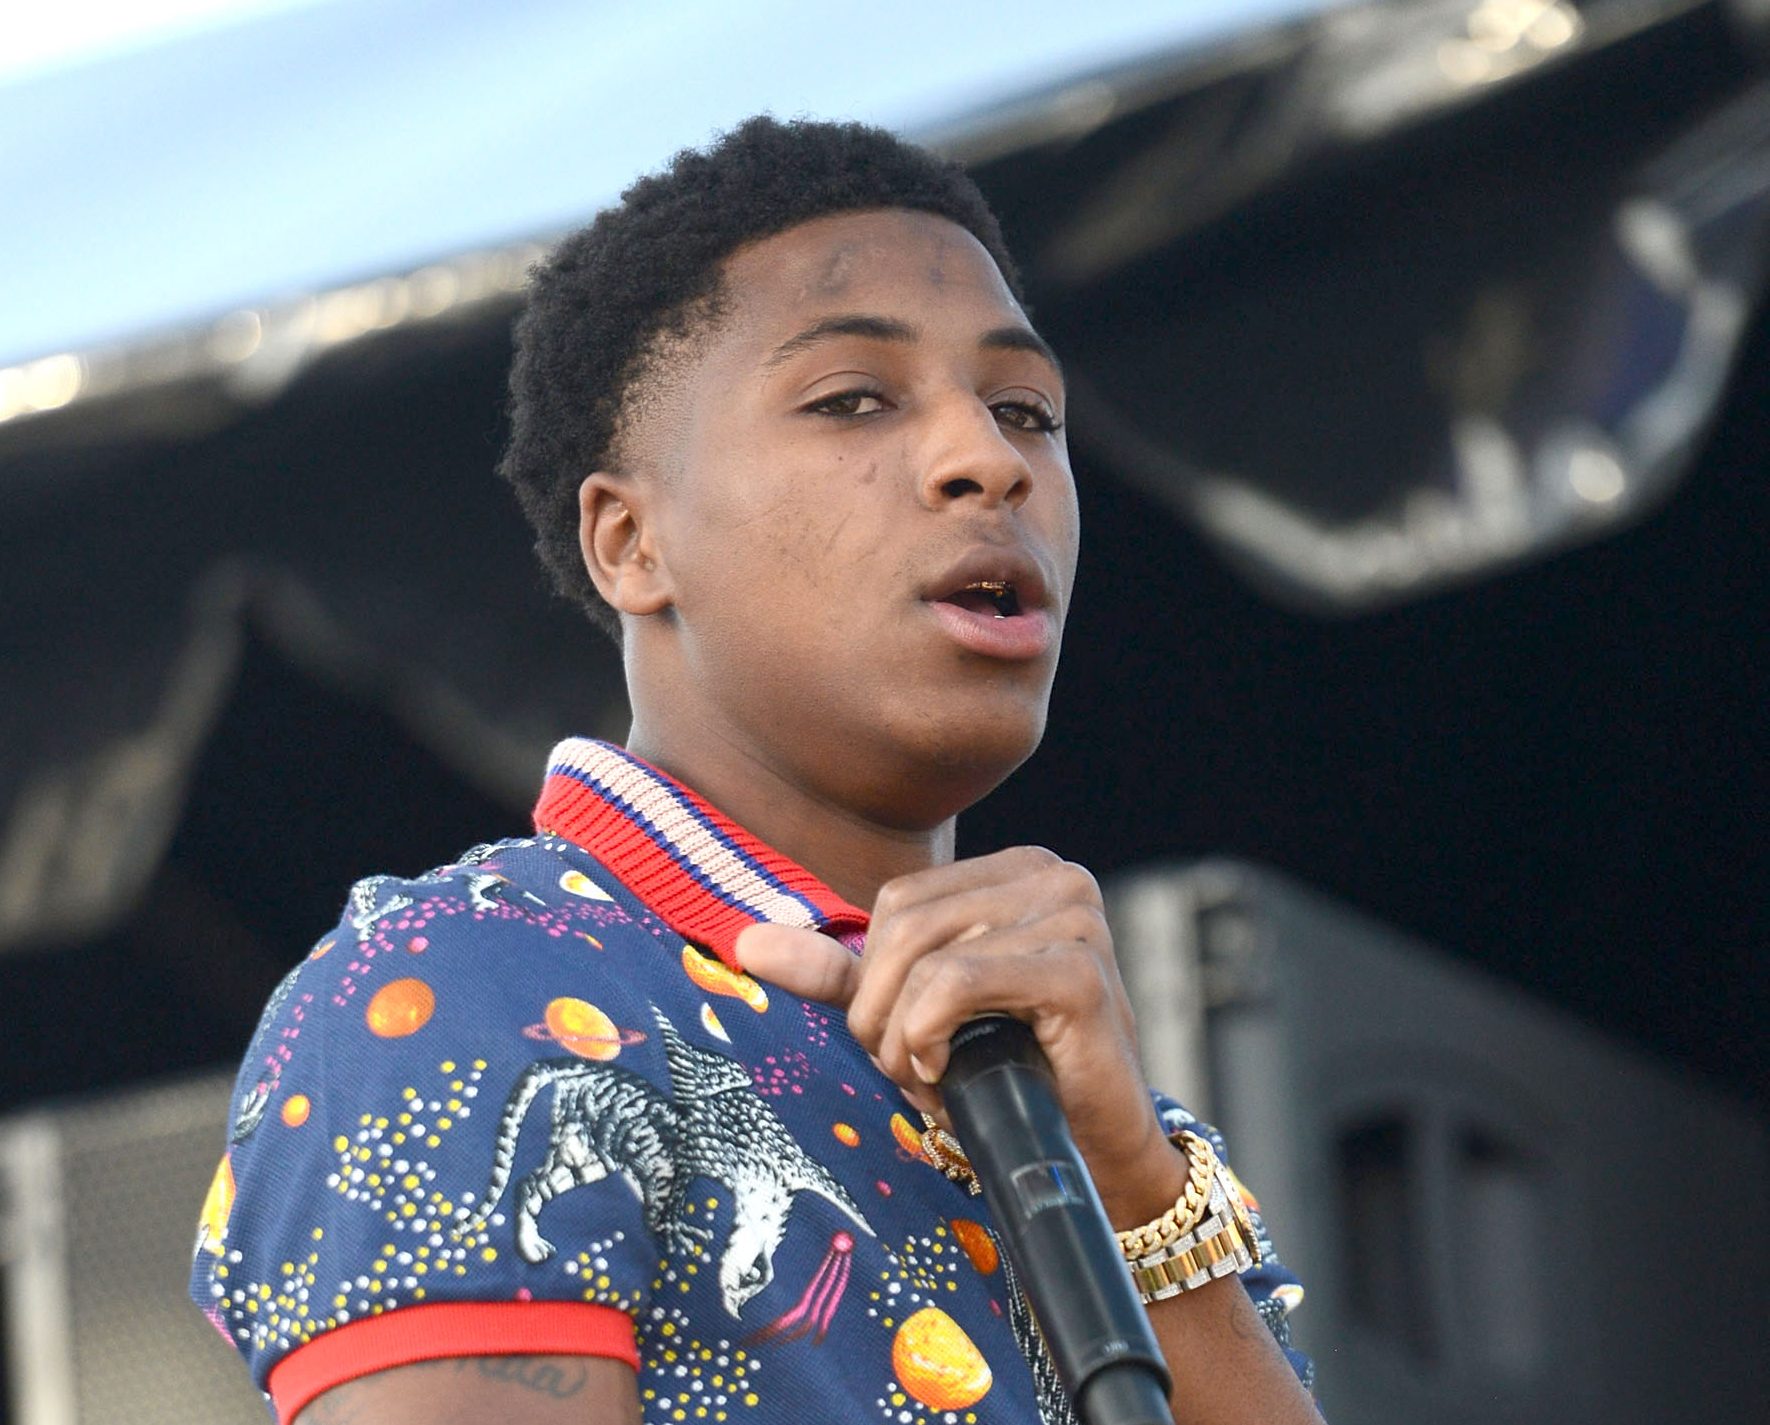 NBA YoungBoy carries Rich The Kid in “Nobody Safe” – The Seahawk's Eye